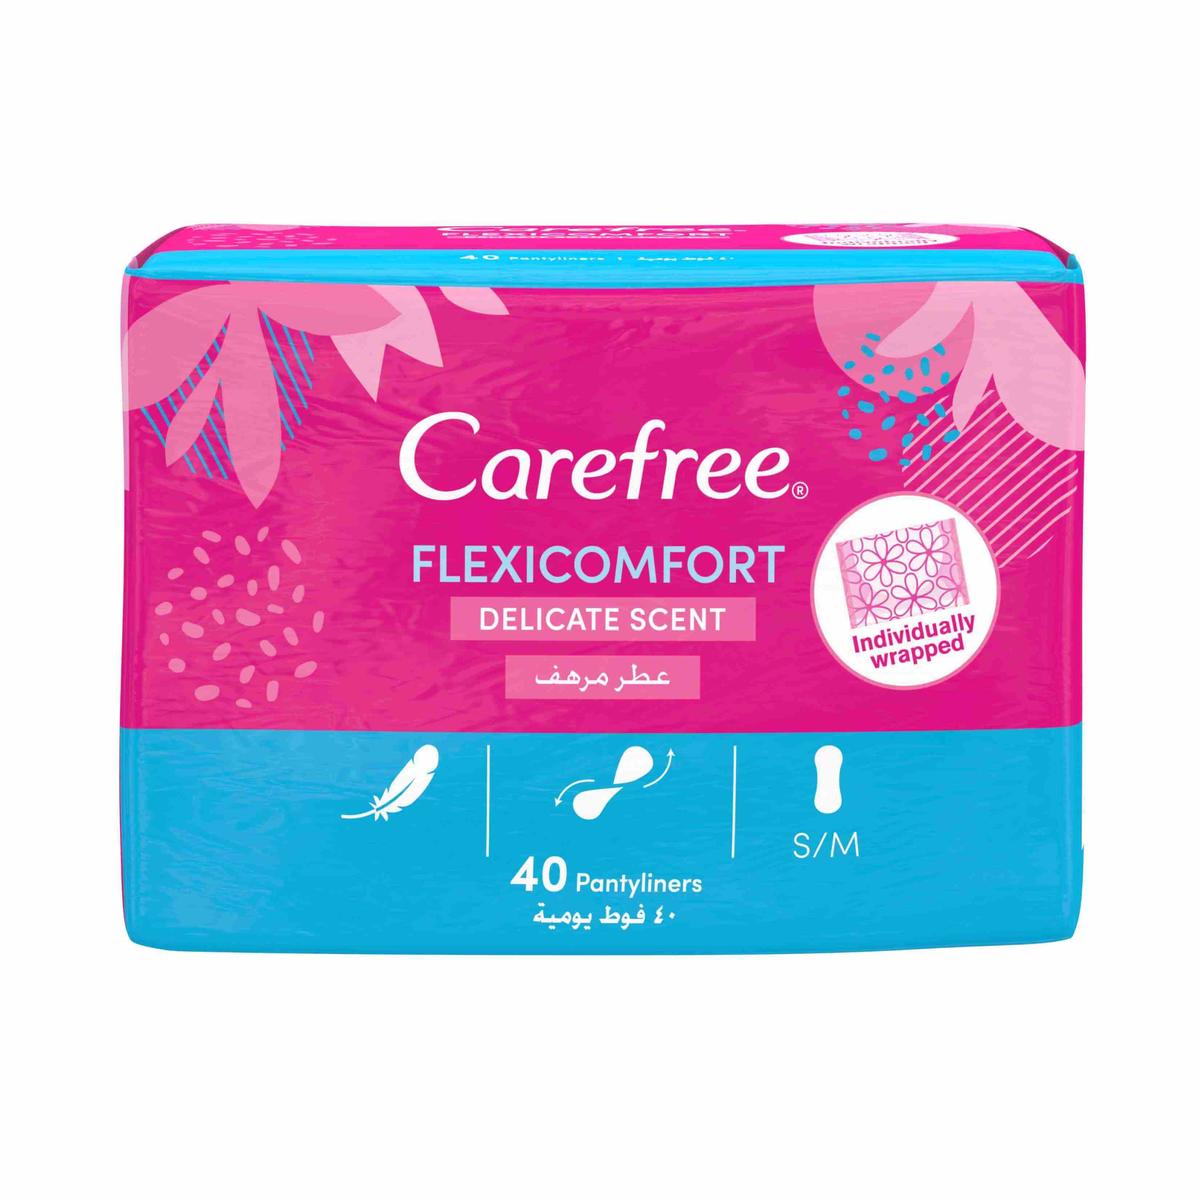 Carefree Flexicomfort Panty Liner Delicate Scent Unscented 40 Pack